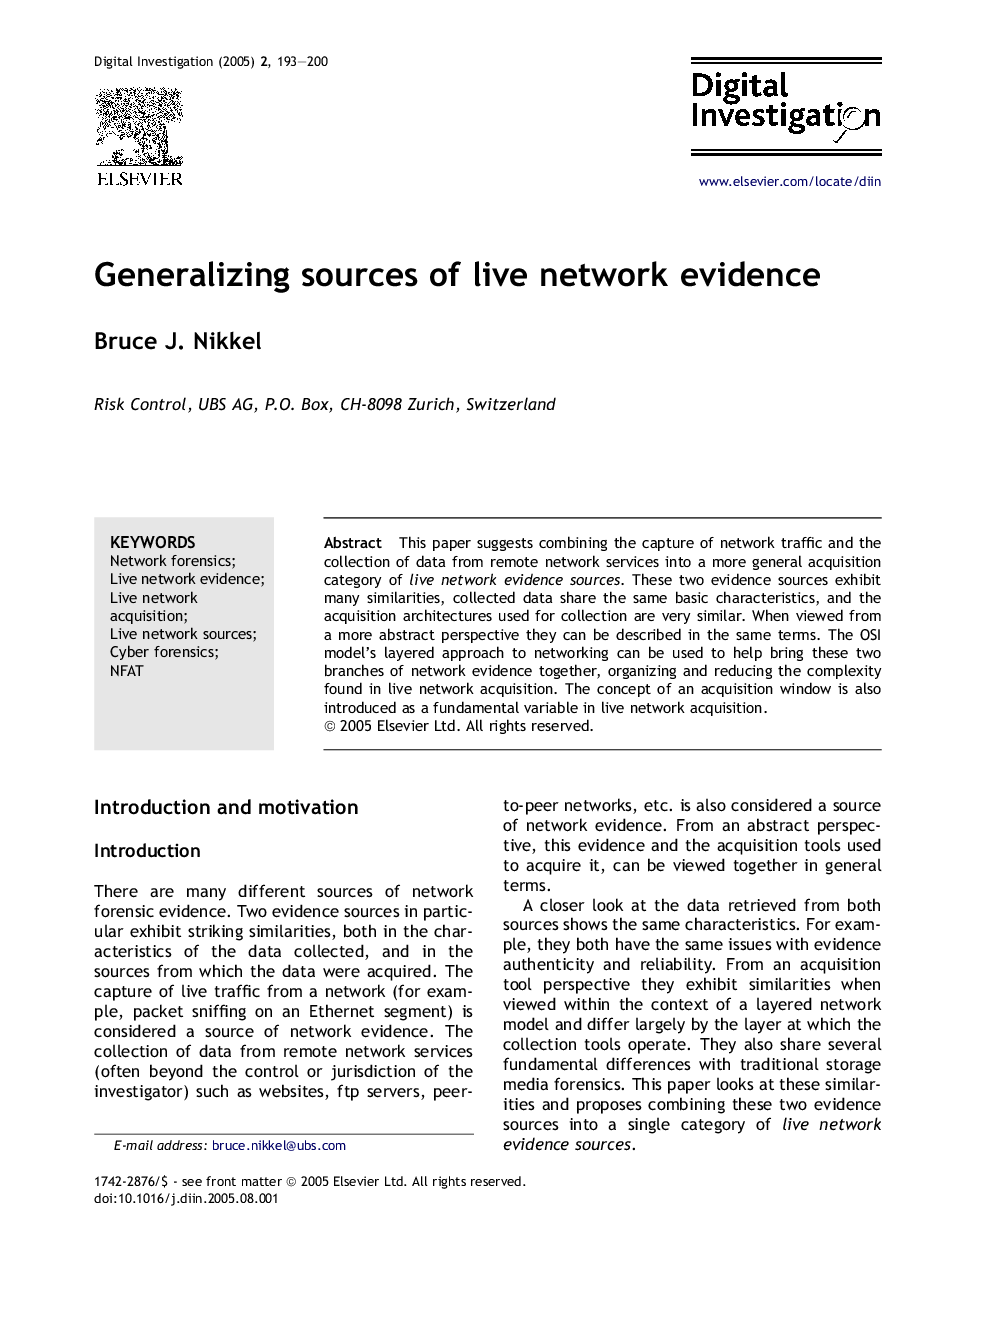 Generalizing sources of live network evidence